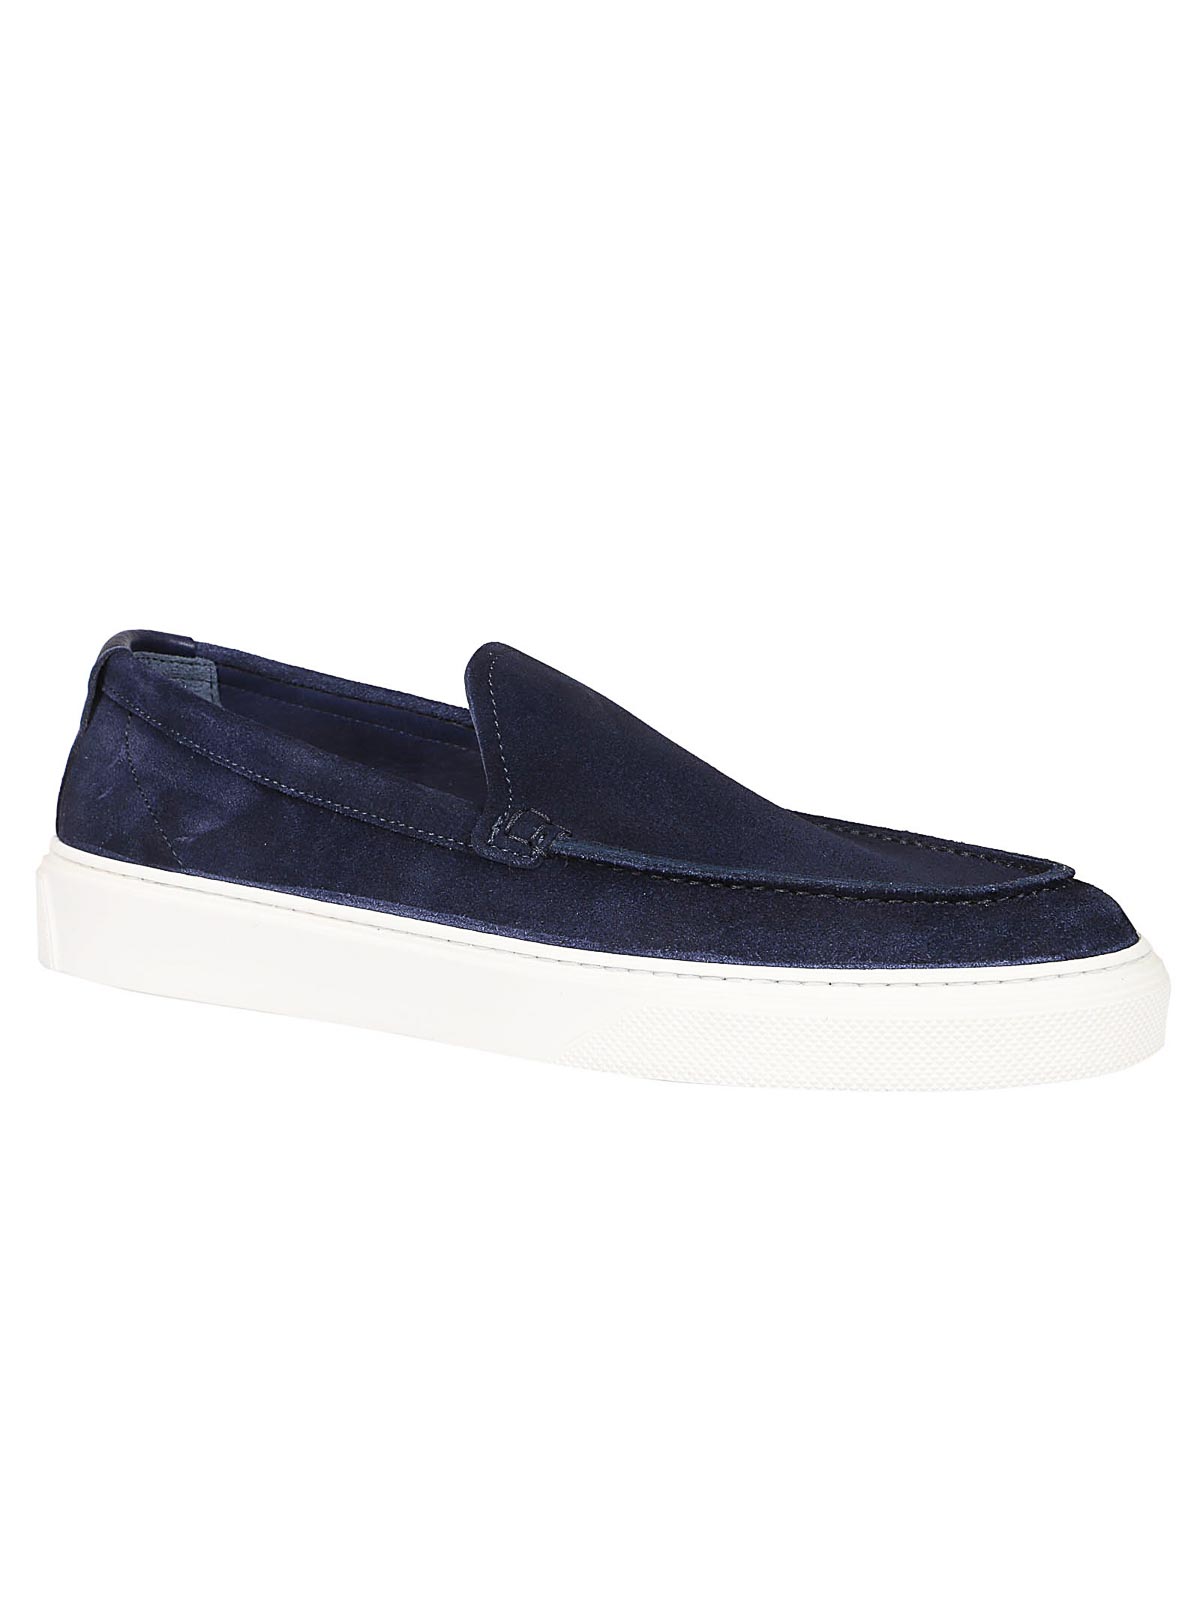 Shop Woolrich Blue Suede Loafers